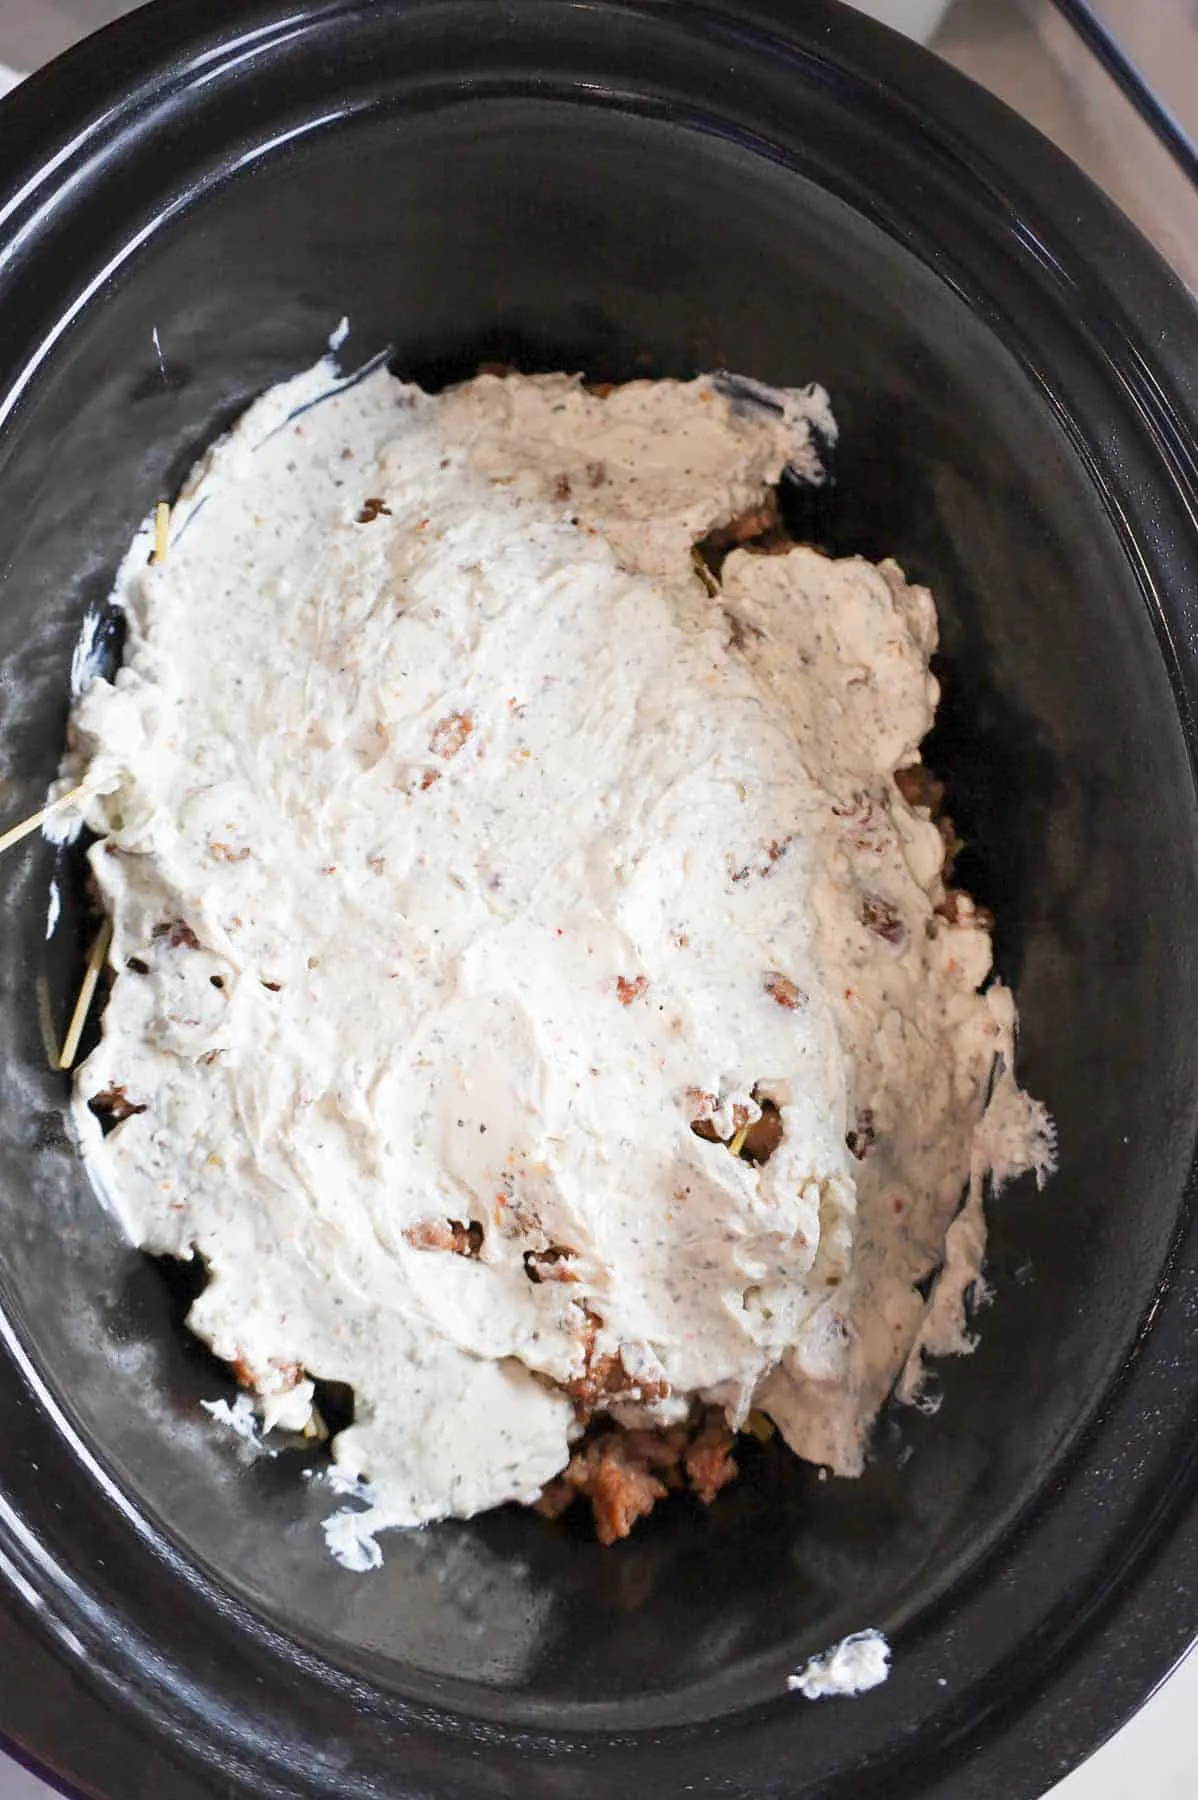 sour cream and cream cheese mixture spread over crumbled sausage and spaghetti in a crock pot